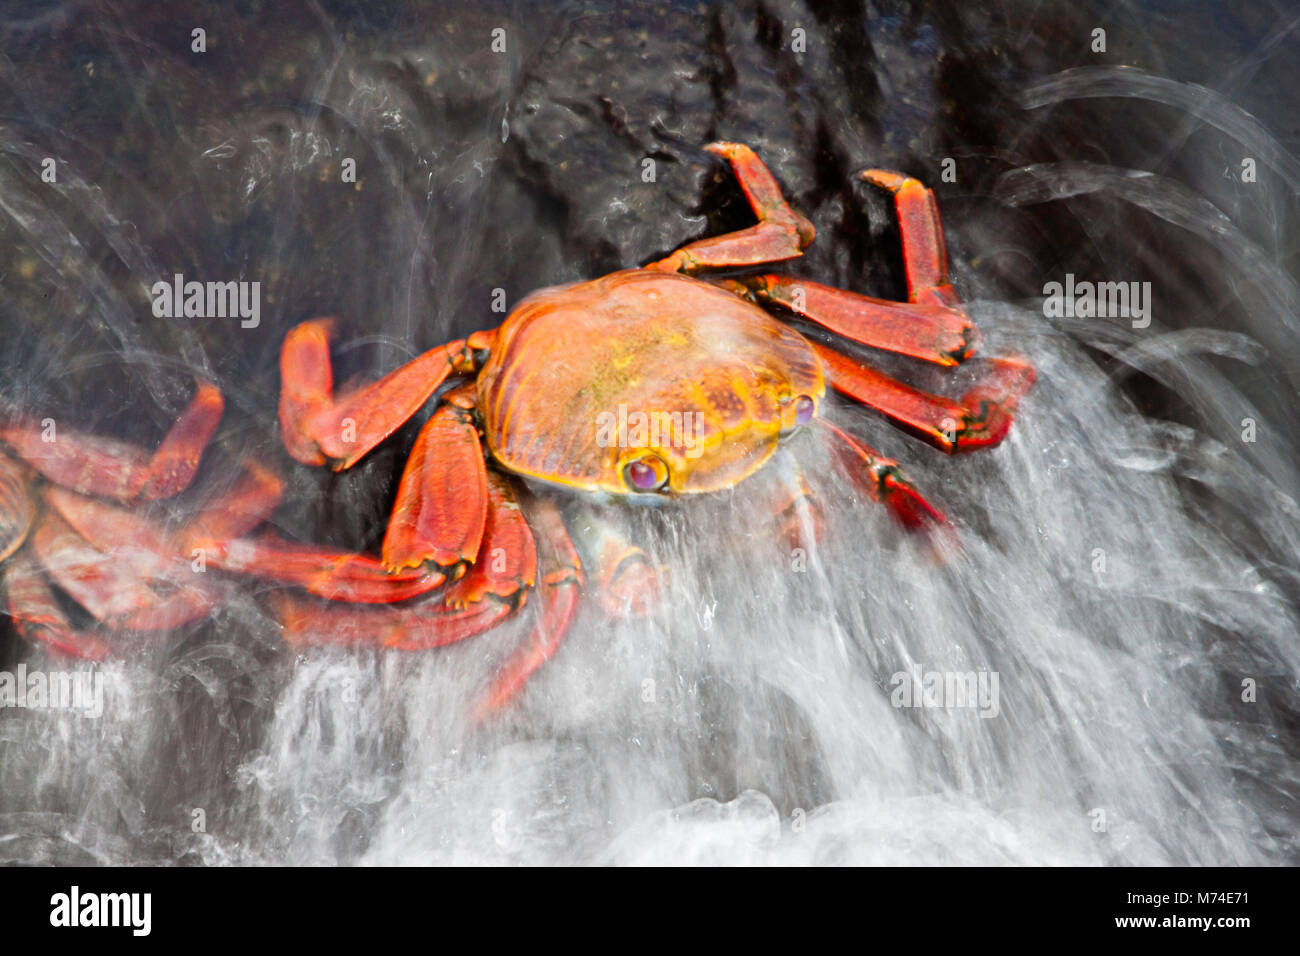 A wave washes over a Sally Lightfoot Crab, Graspus graspus, searching for algae to dine on in the intertidal zone, Santa Cruz Island, Galapagos. Stock Photo